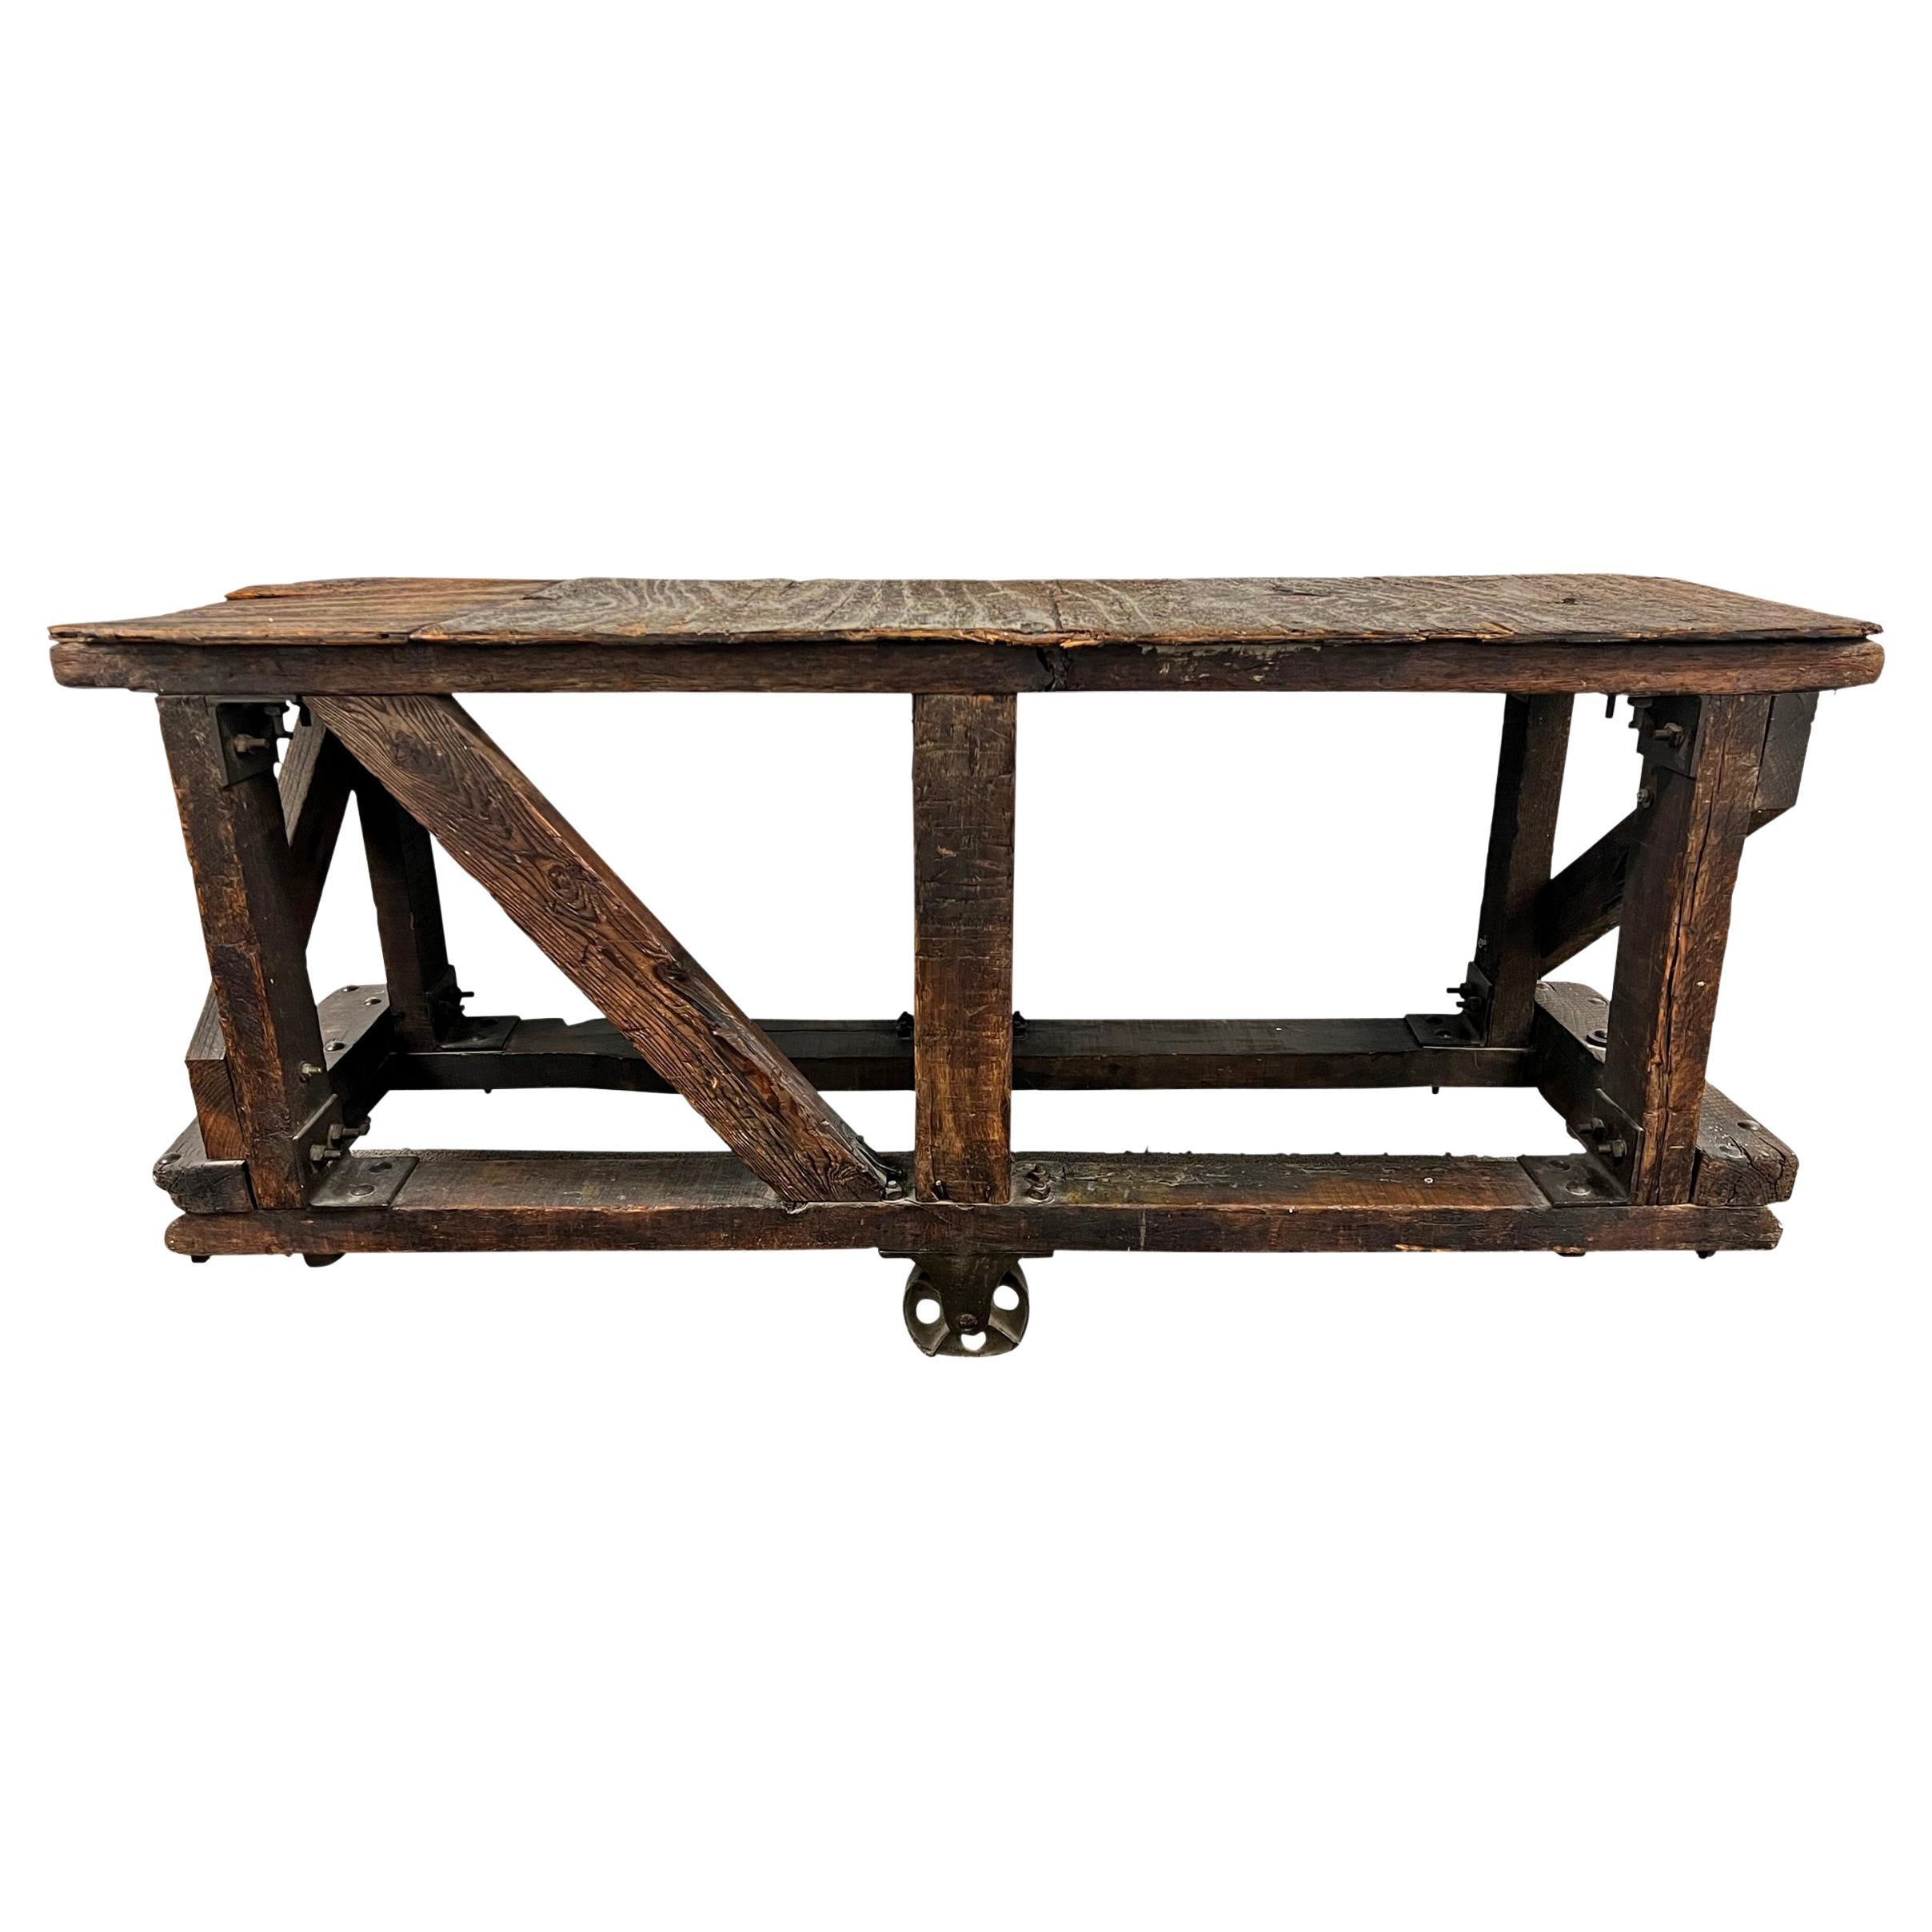 Early 20th Century American Industrial Table For Sale